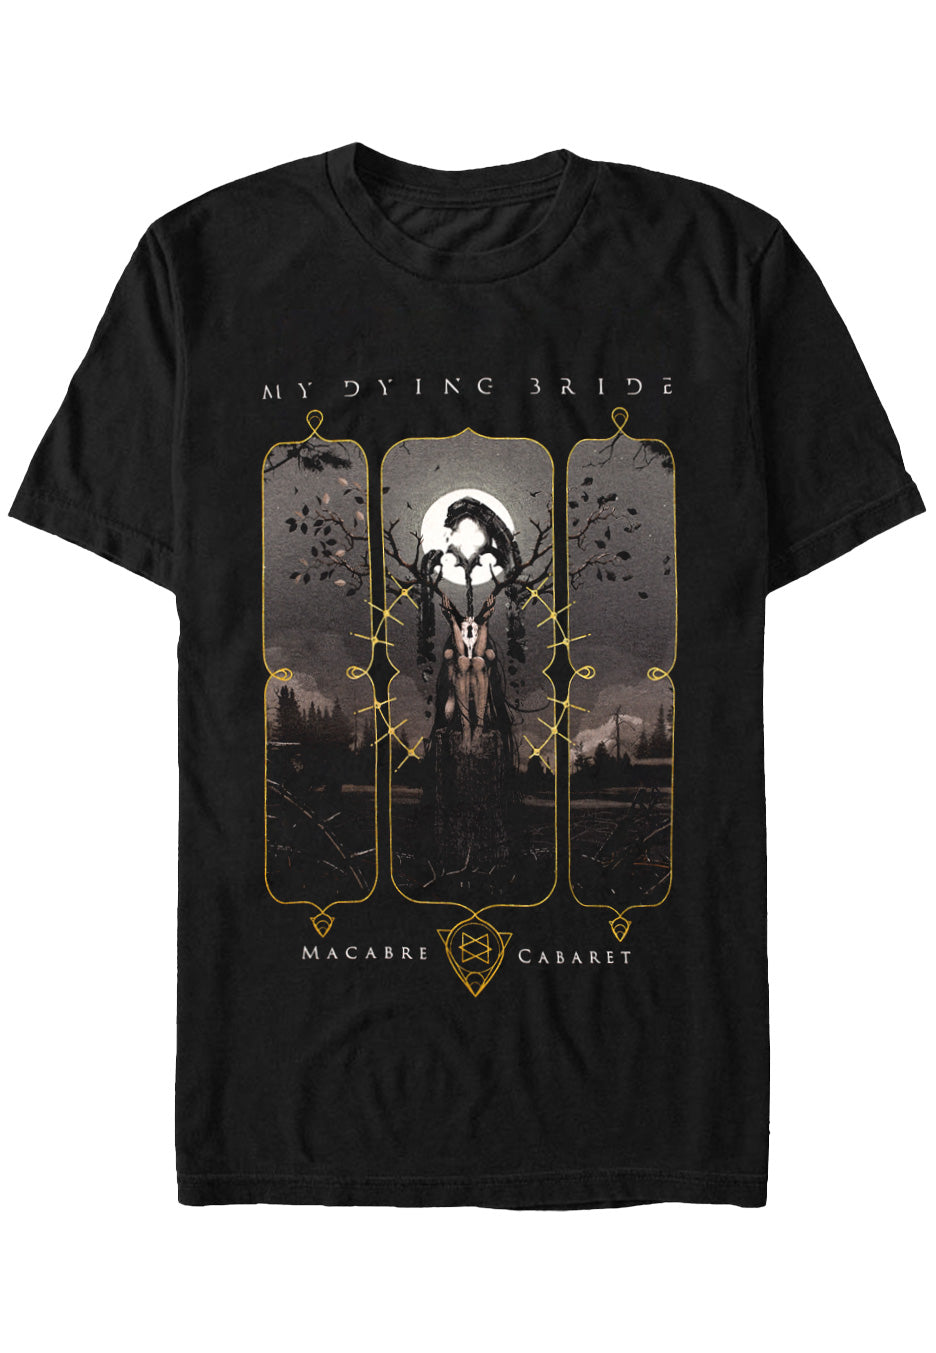 My Dying Bride - Macabre Cabaret - T-Shirt